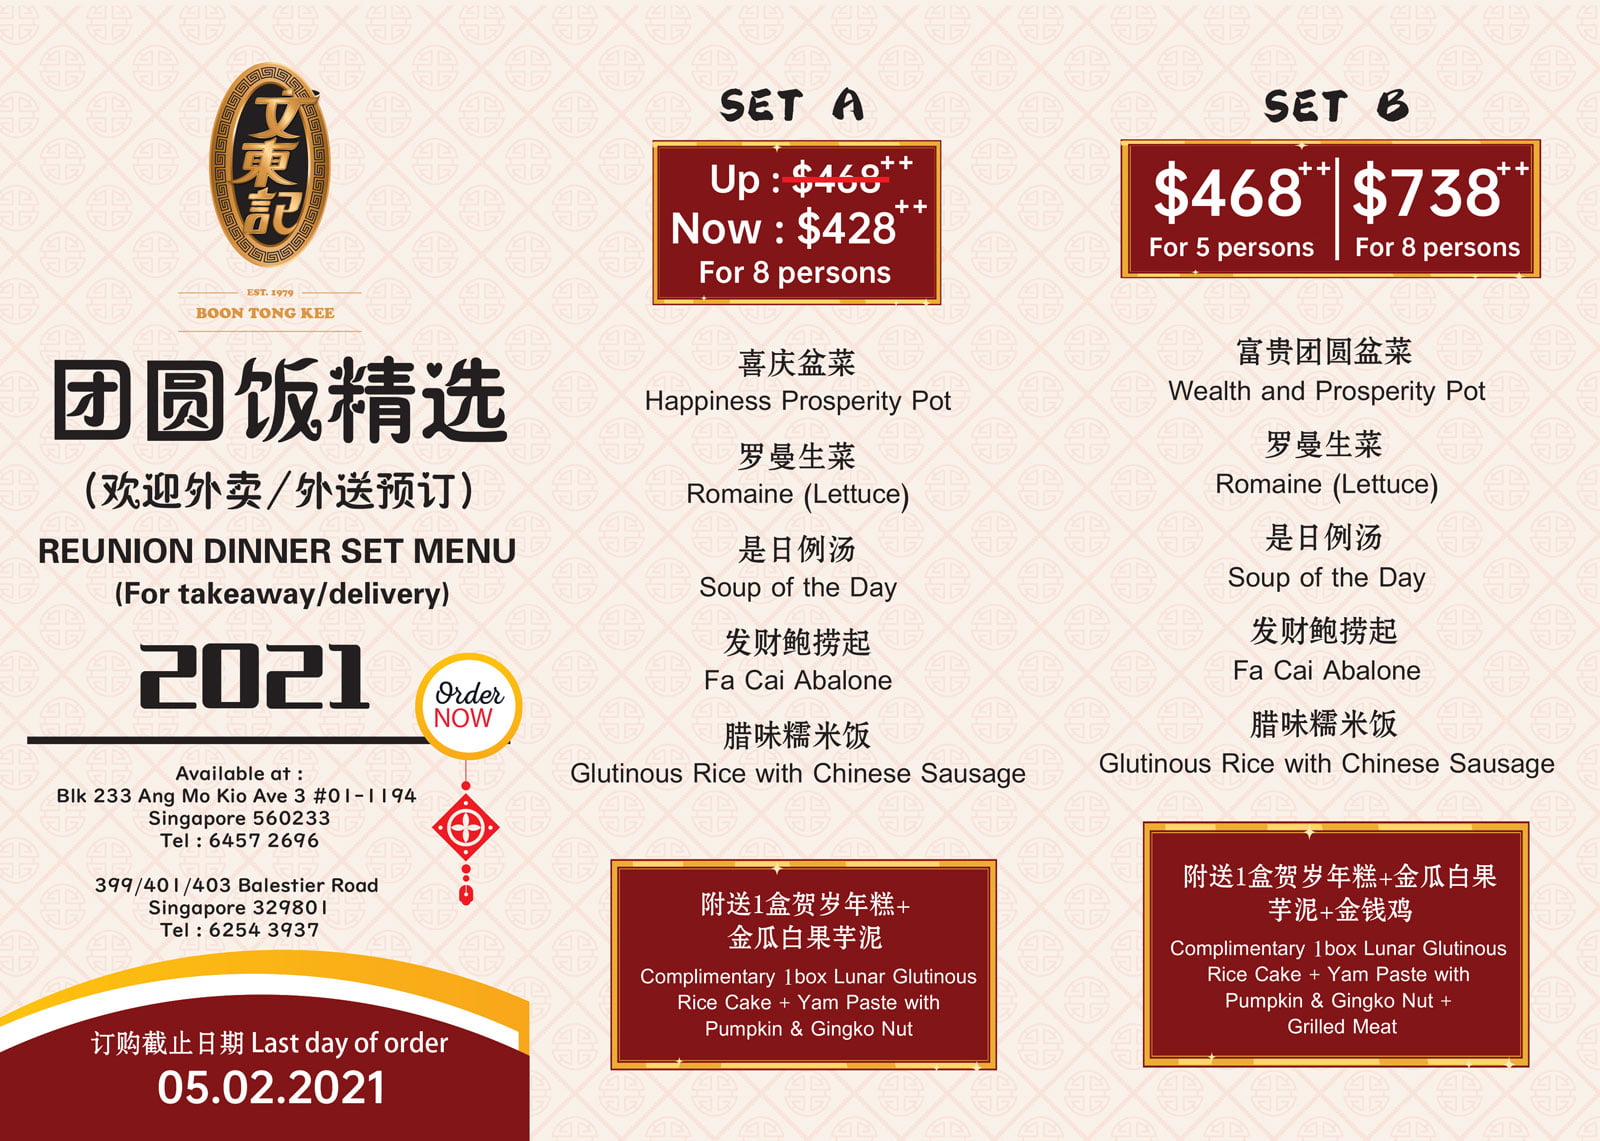 REUNION DINNER SET MENU (For takeaway, Delivery and Dine-In)